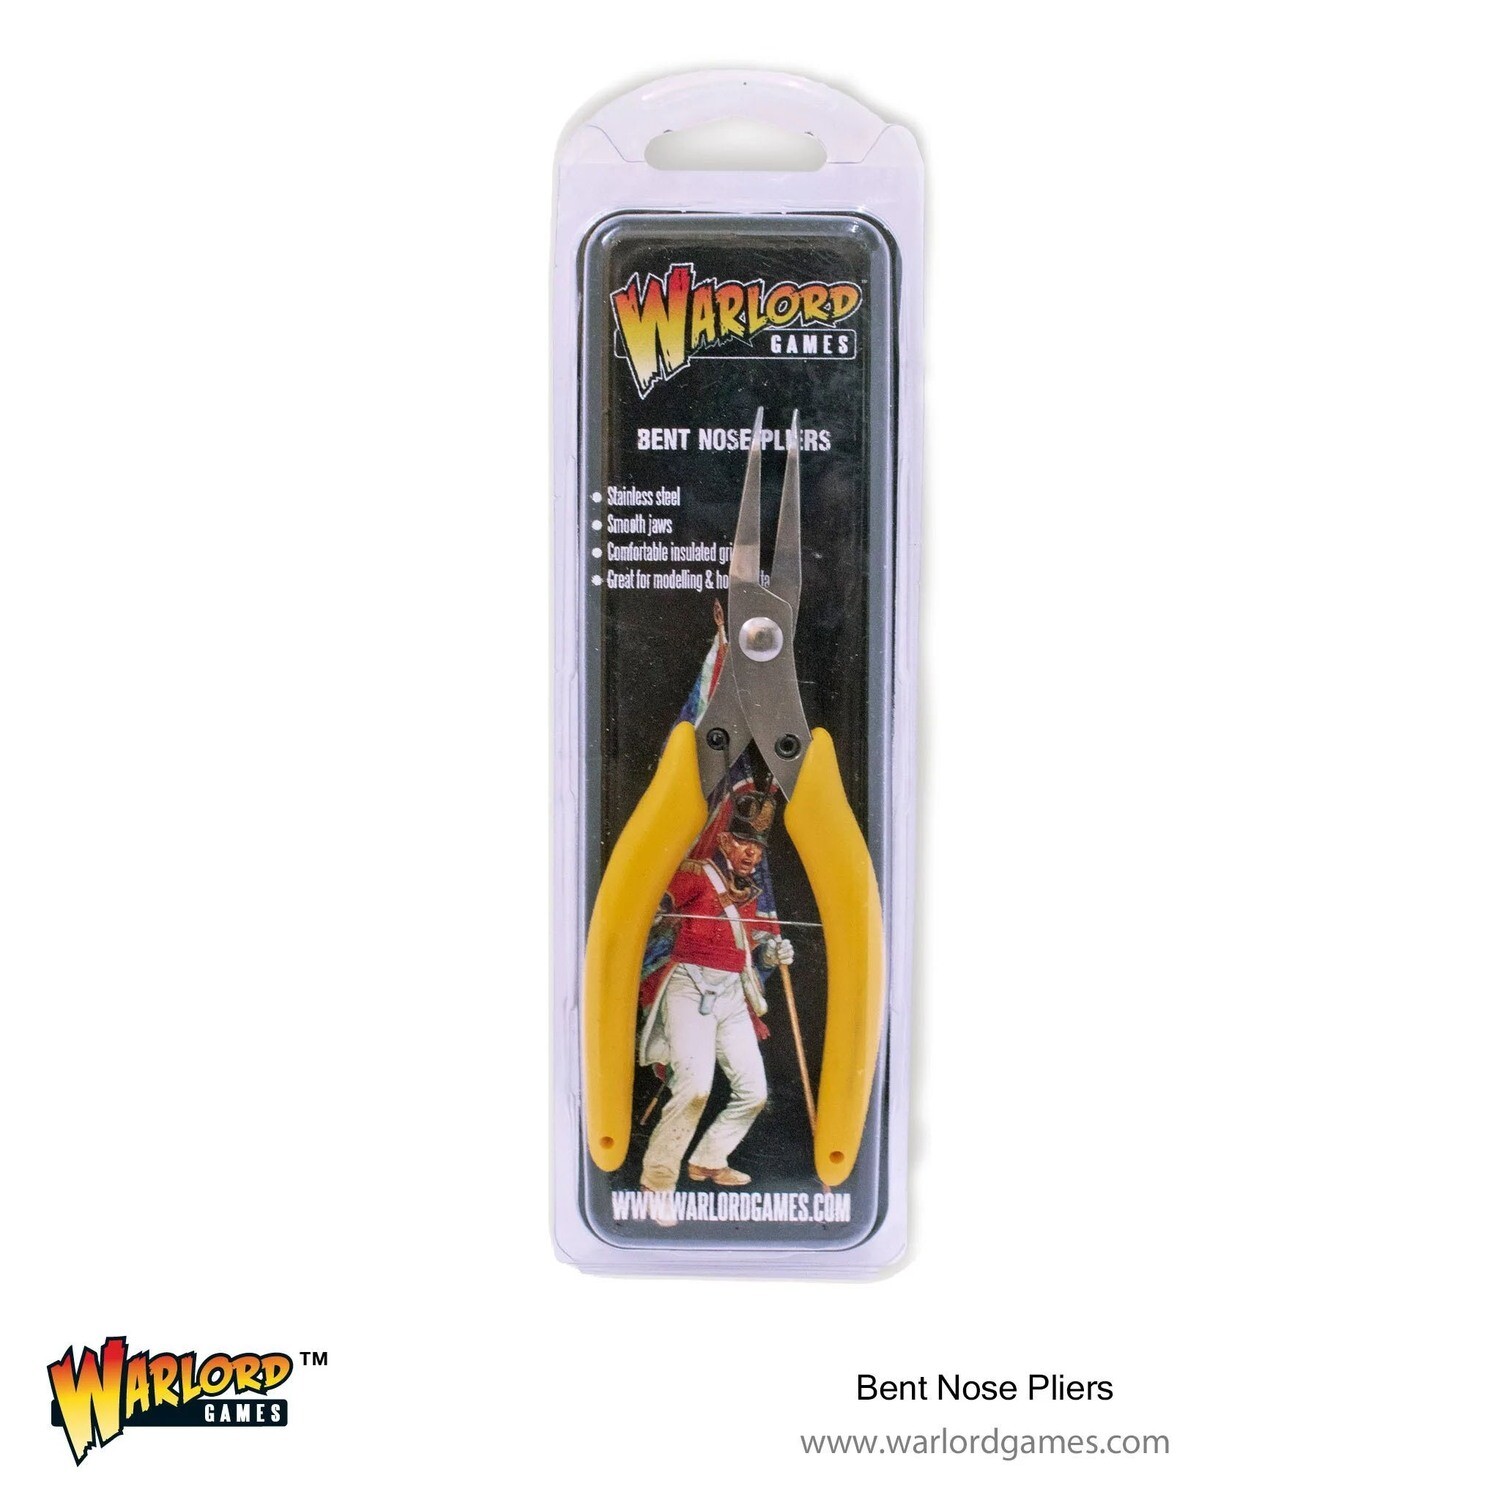 Warlord Bent Nose Pliers - Warlord Games